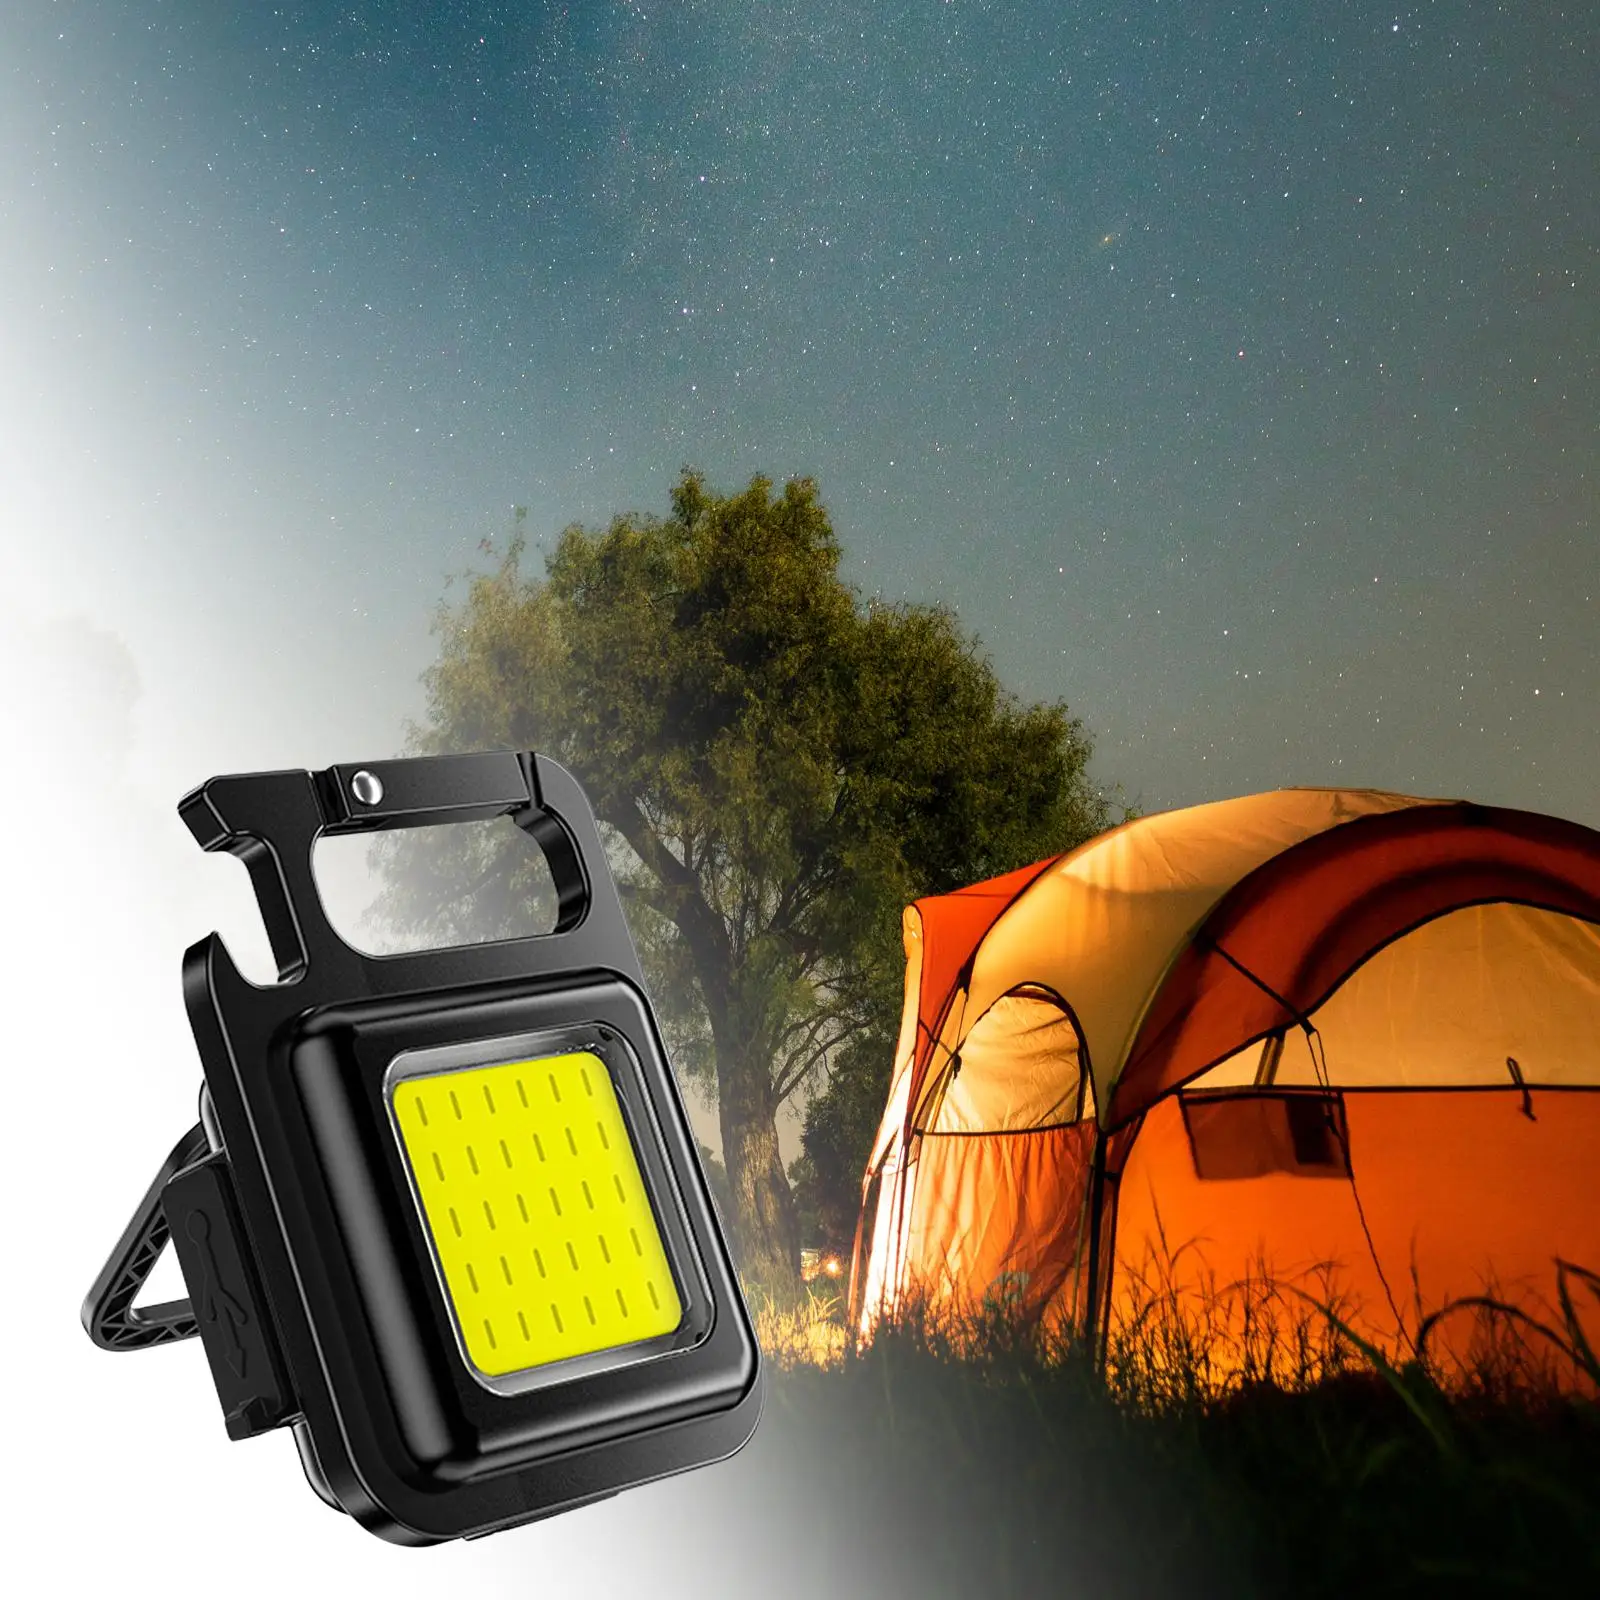 Portable COB Keychain Flashlight Lamp USB Rechargeable Waterproof Bottle Opener Torch Emergency Light for Fishing Work Hiking